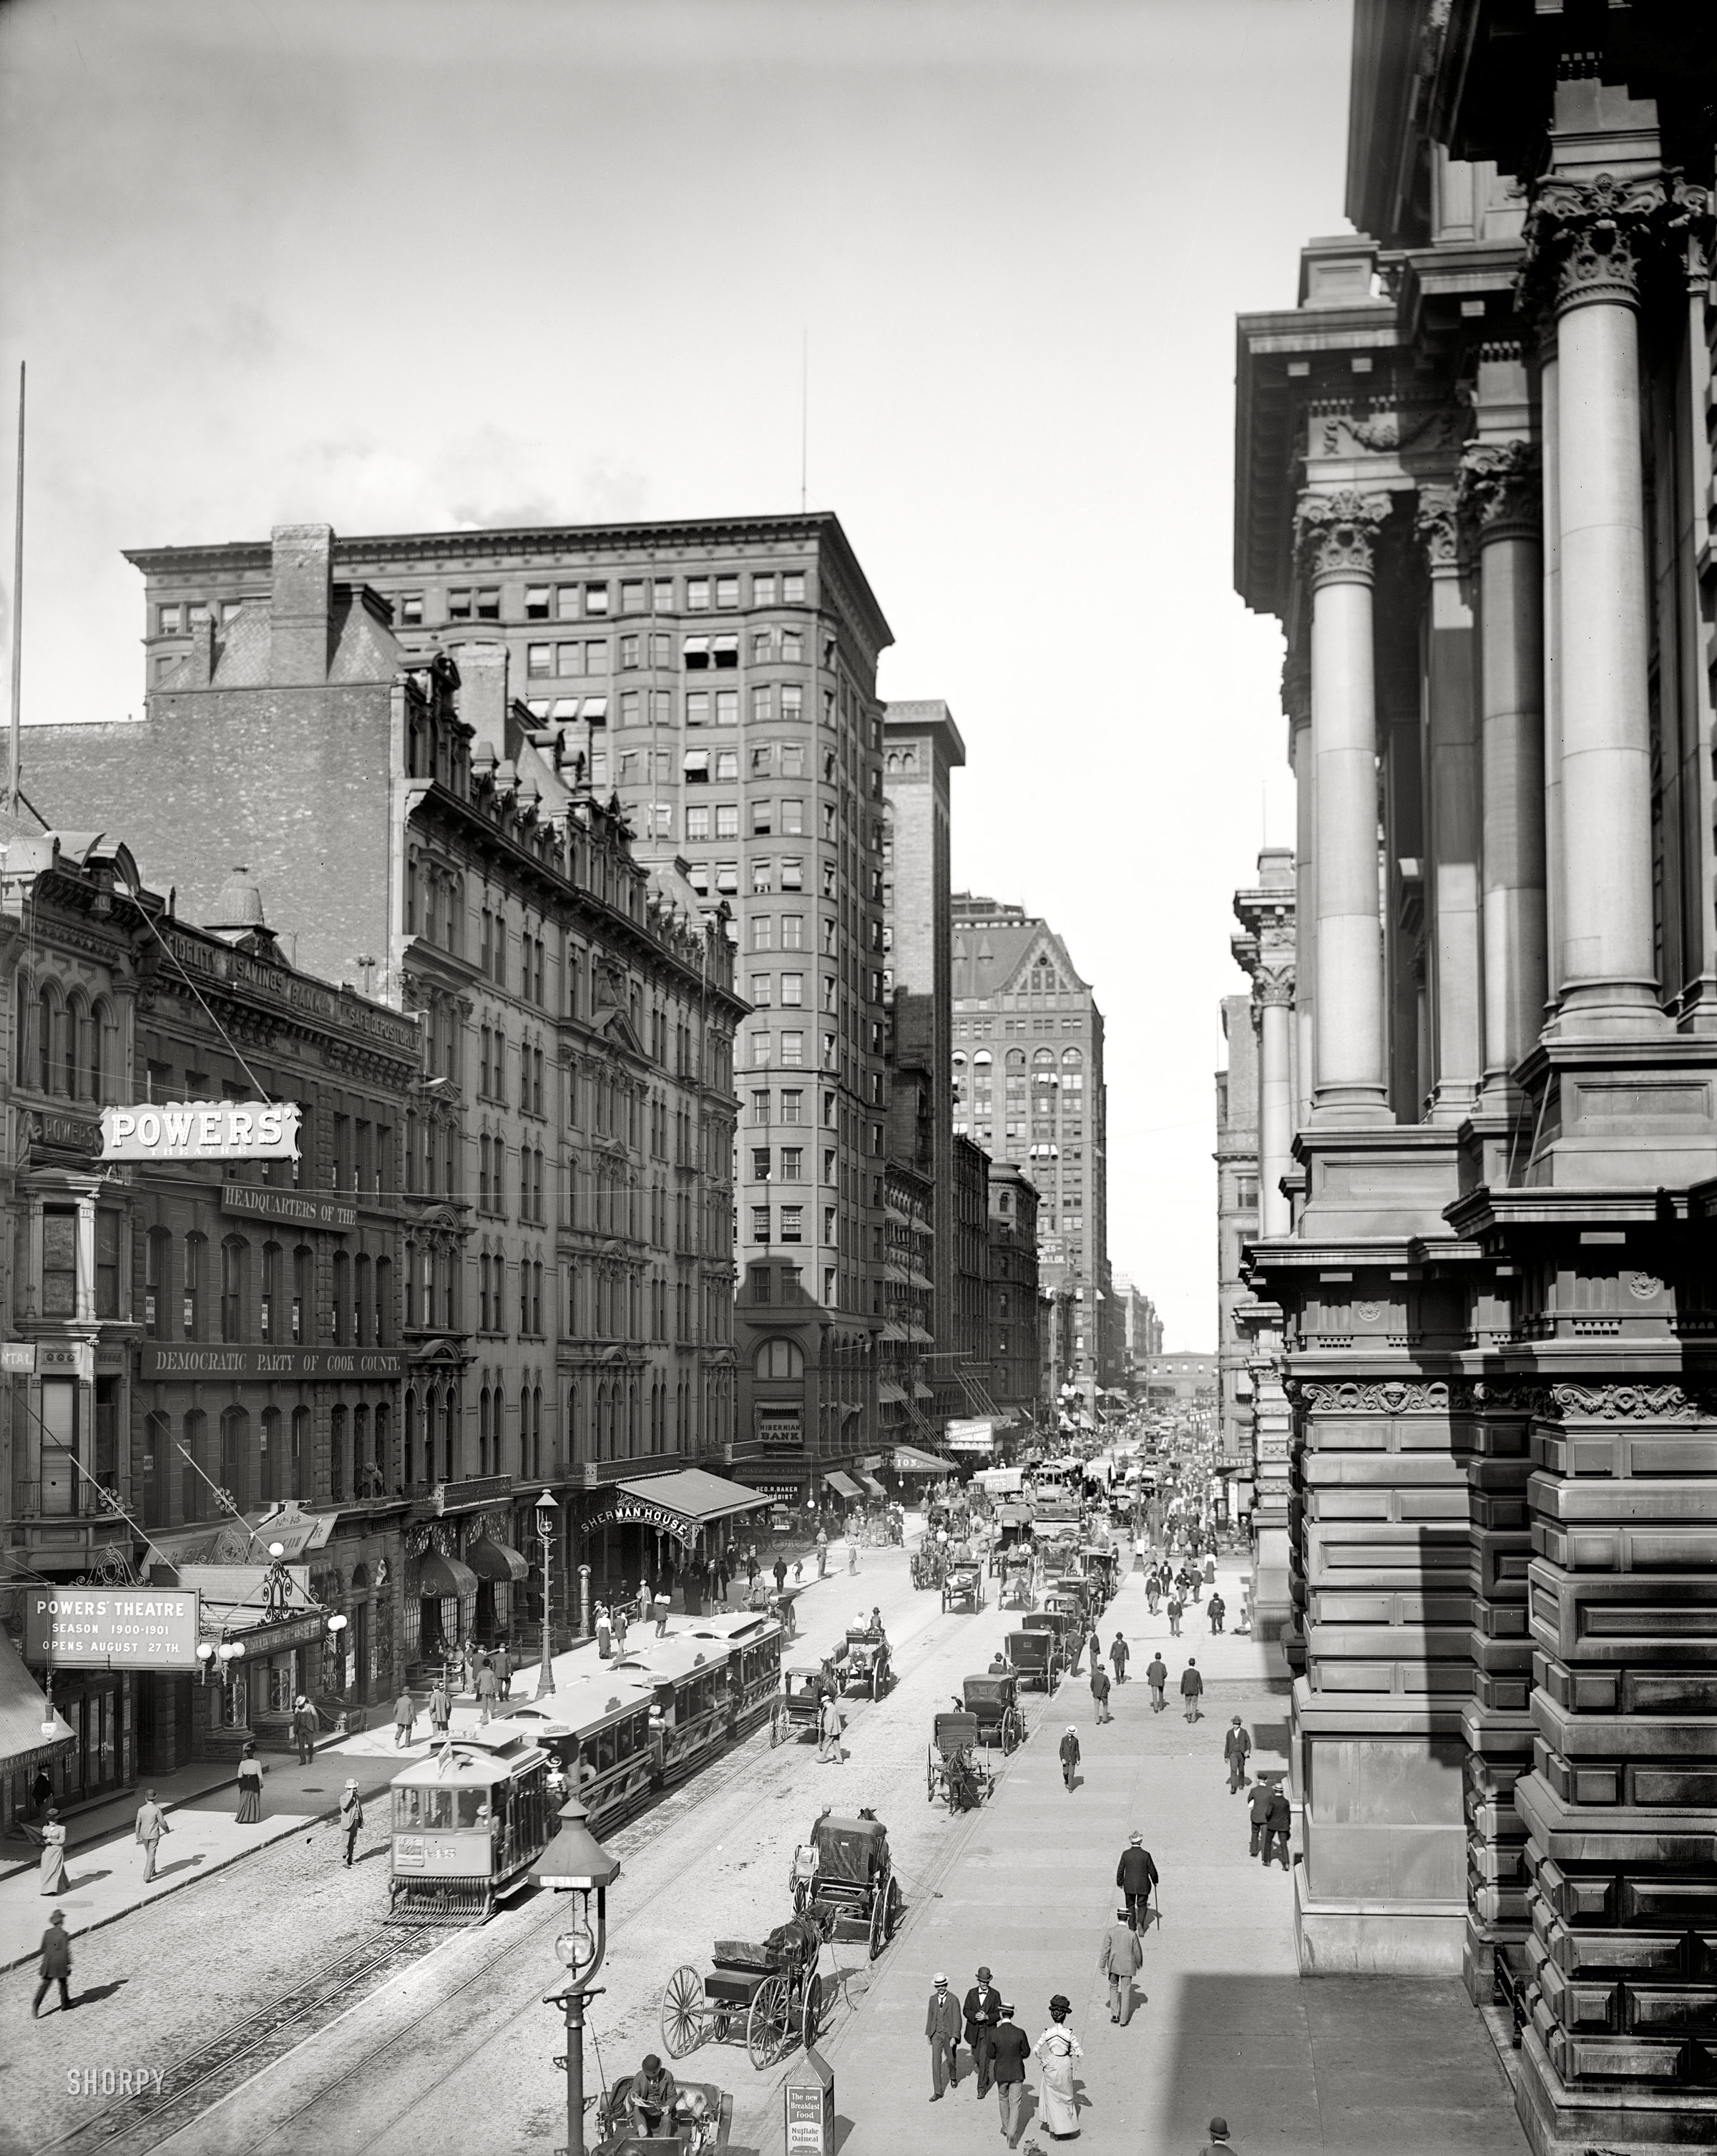 September 1, 1900. "Randolph Street east from LaSalle, Chicago." 8x10 glass negative, Detroit Publishing Company. View full size.